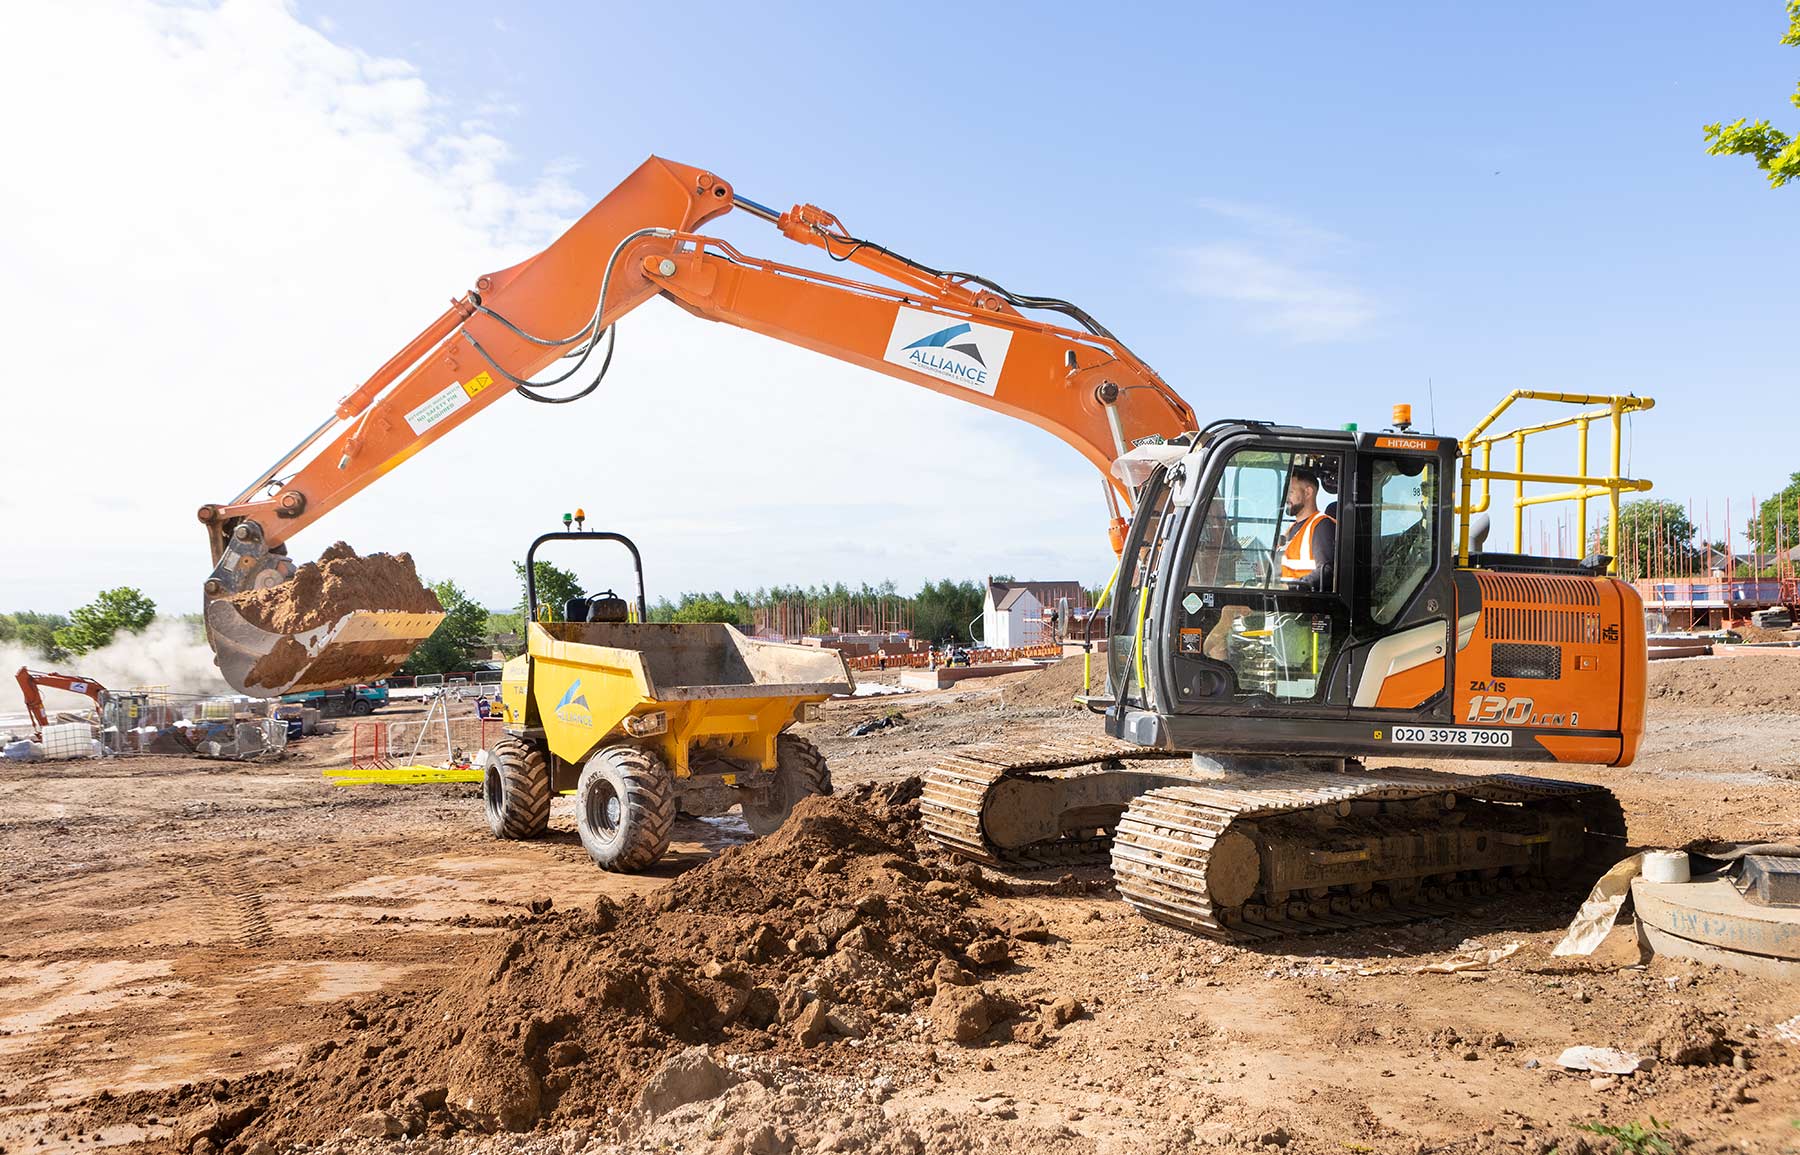 Plant Machinery, an orange Hitachi Xaxis 130 excavator loading a Medcalac TA9 dumper truck on a construction site with brown earth and a blue sky